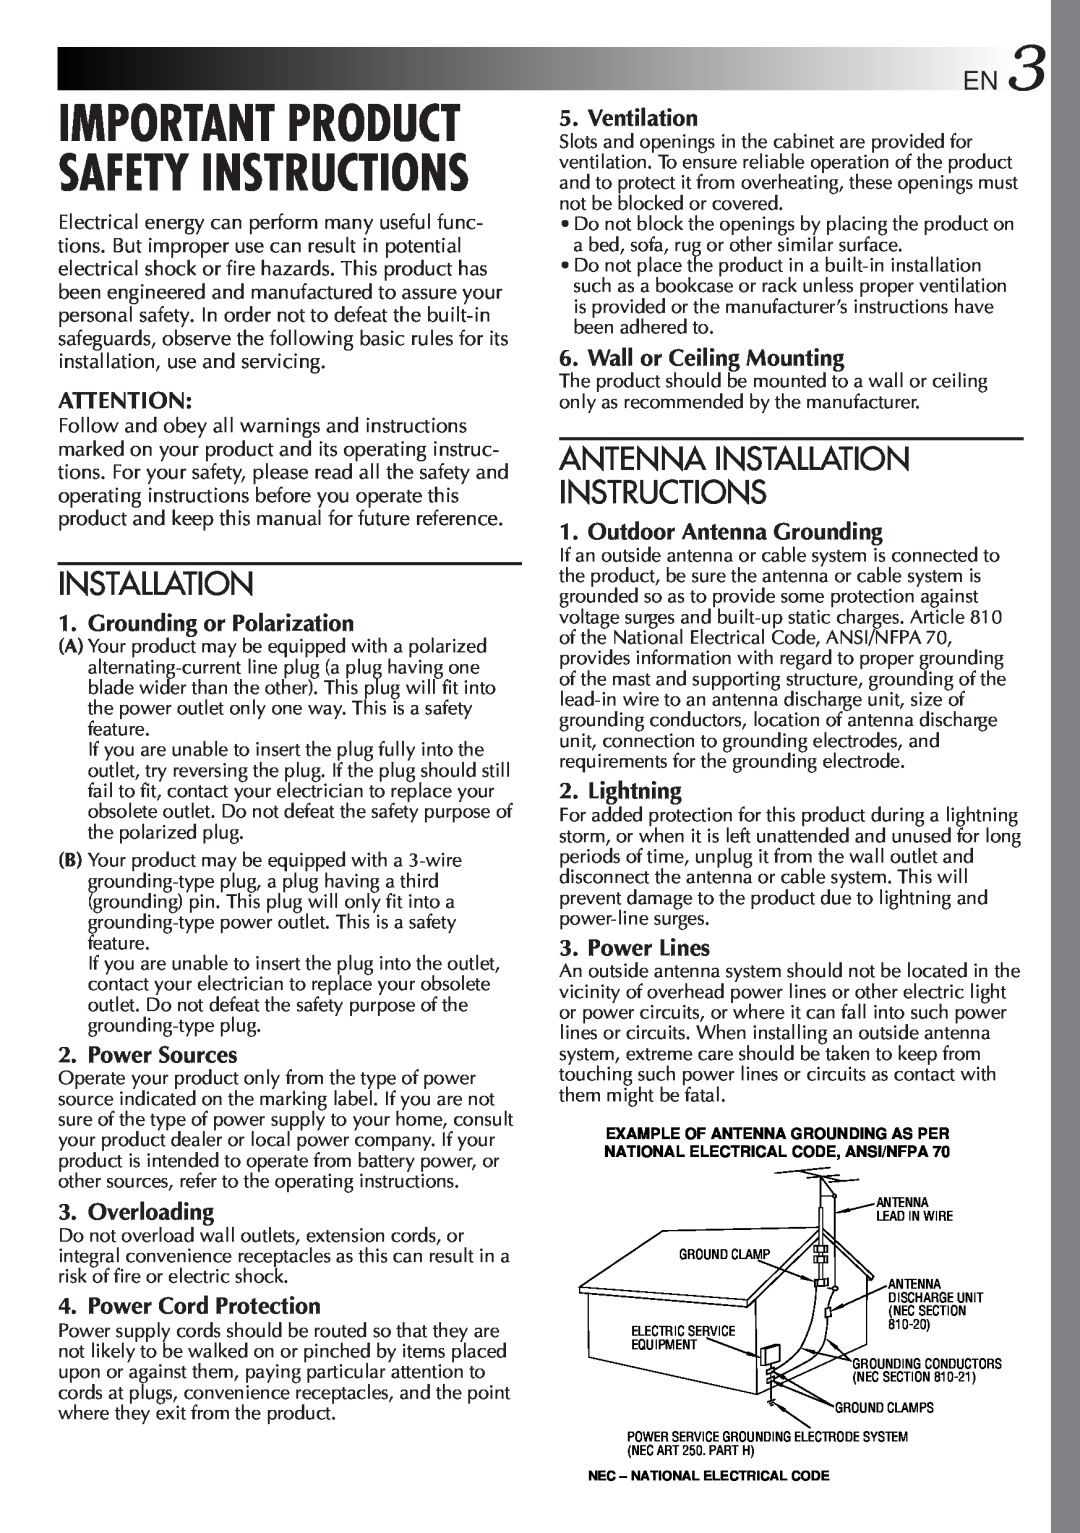 JVC GR-AXM100 Important Product Safety Instructions, Antenna Installation Instructions, Grounding or Polarization 